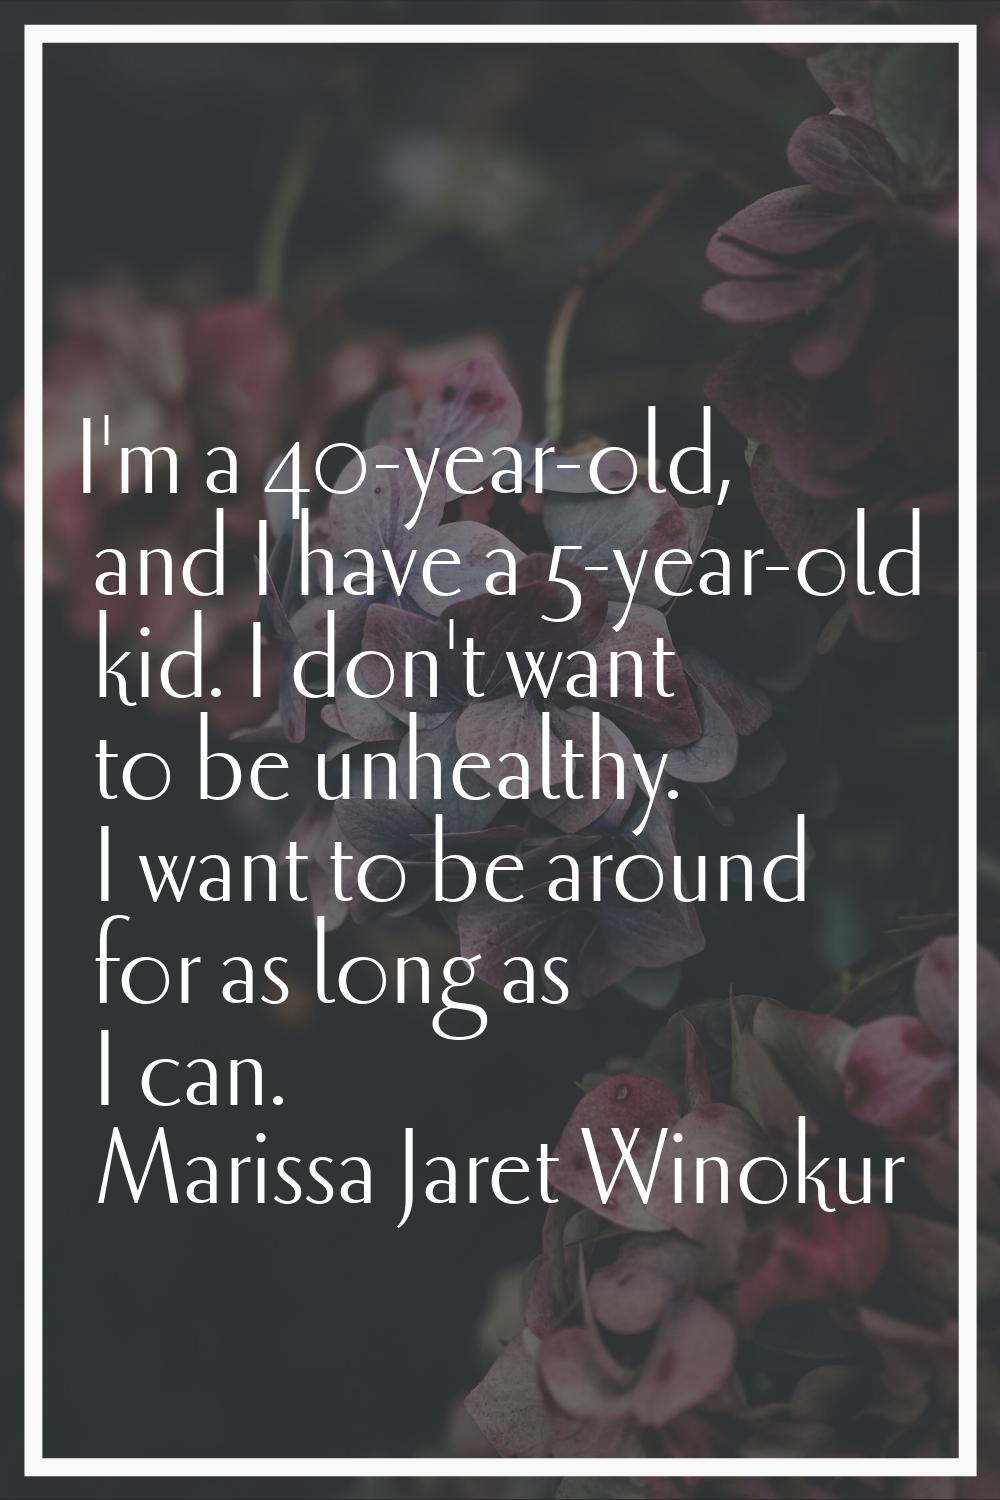 I'm a 40-year-old, and I have a 5-year-old kid. I don't want to be unhealthy. I want to be around f